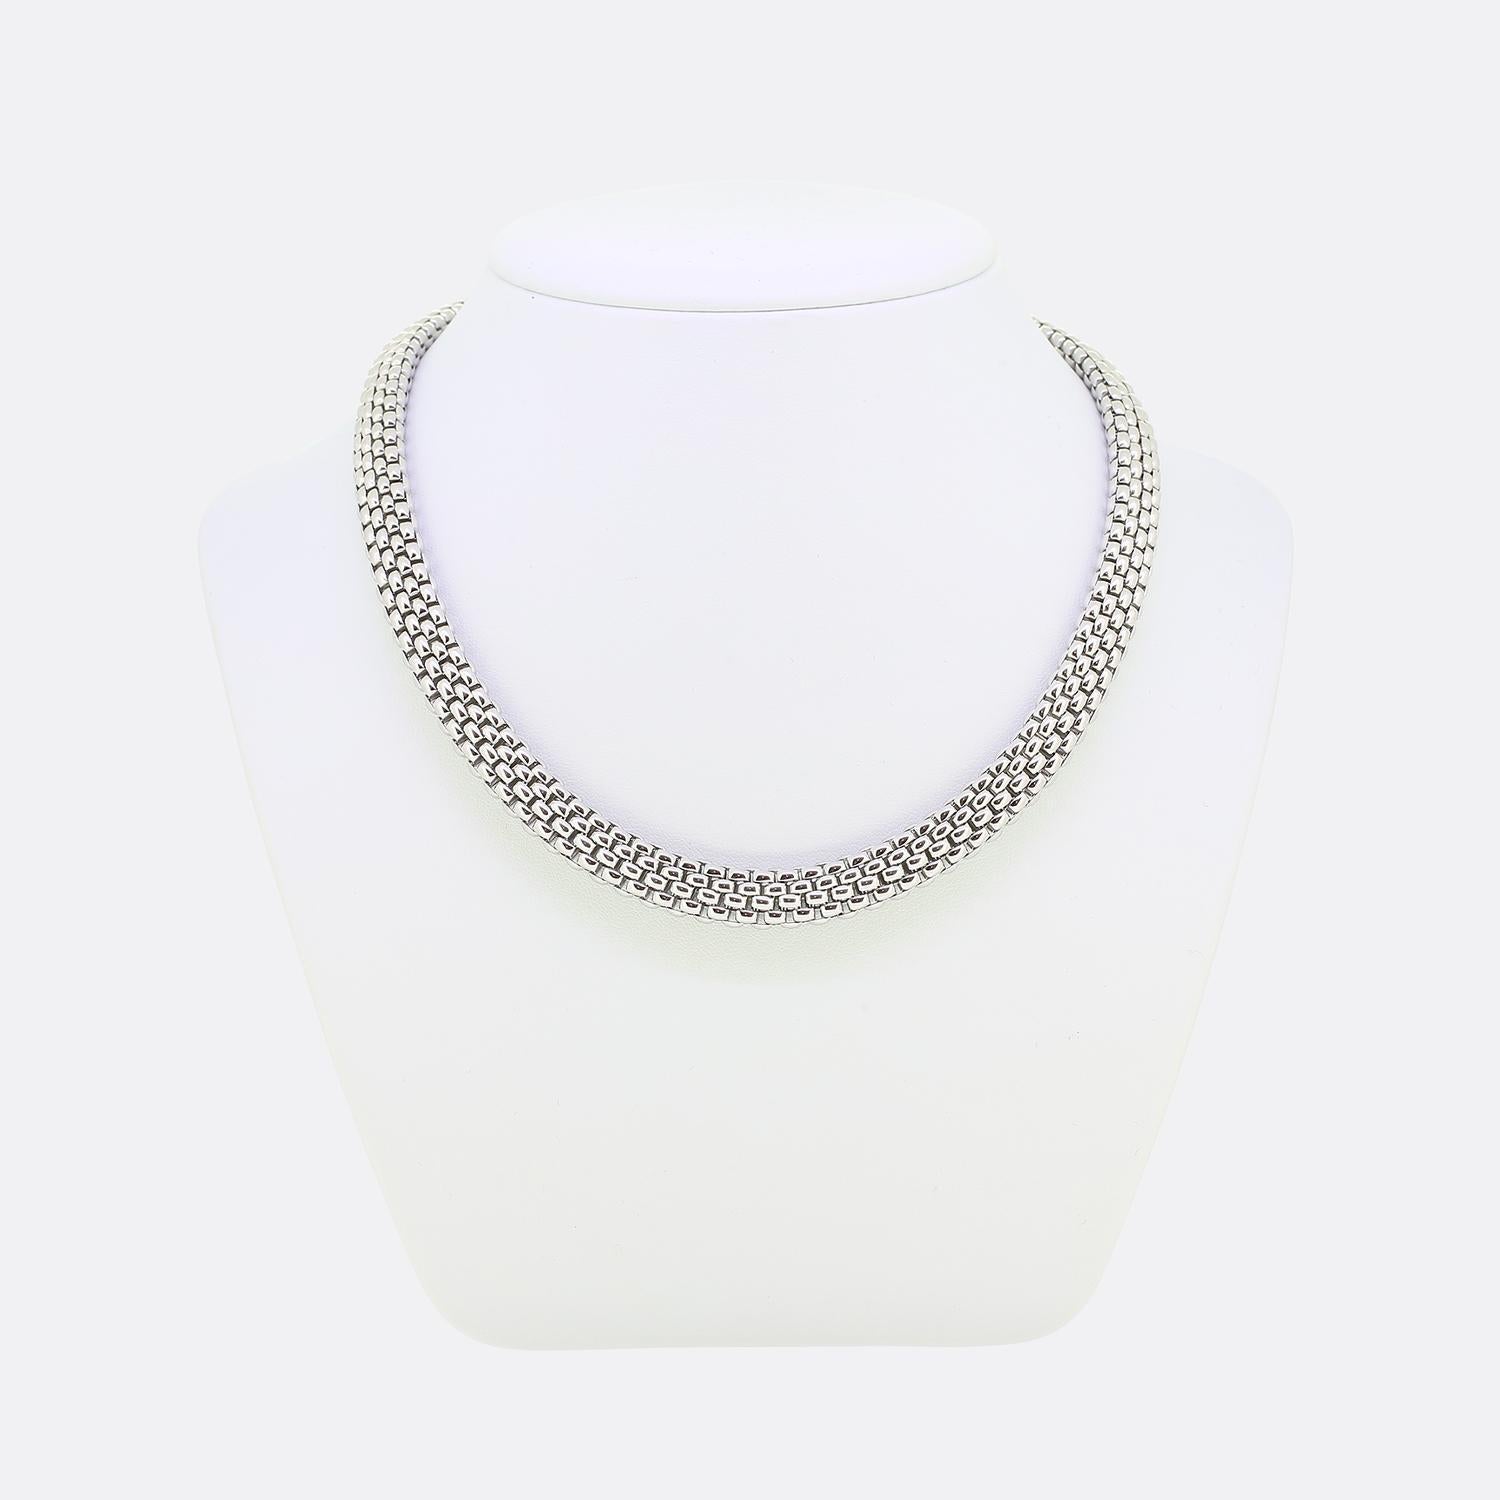 Here we have an 18ct white gold chain necklace from the luxury jewellery designer Fope. The necklace forms part of the Profili Collection and is an impressive 63.6 grams in weight. The Profili Collection's signature woven mesh link design exudes